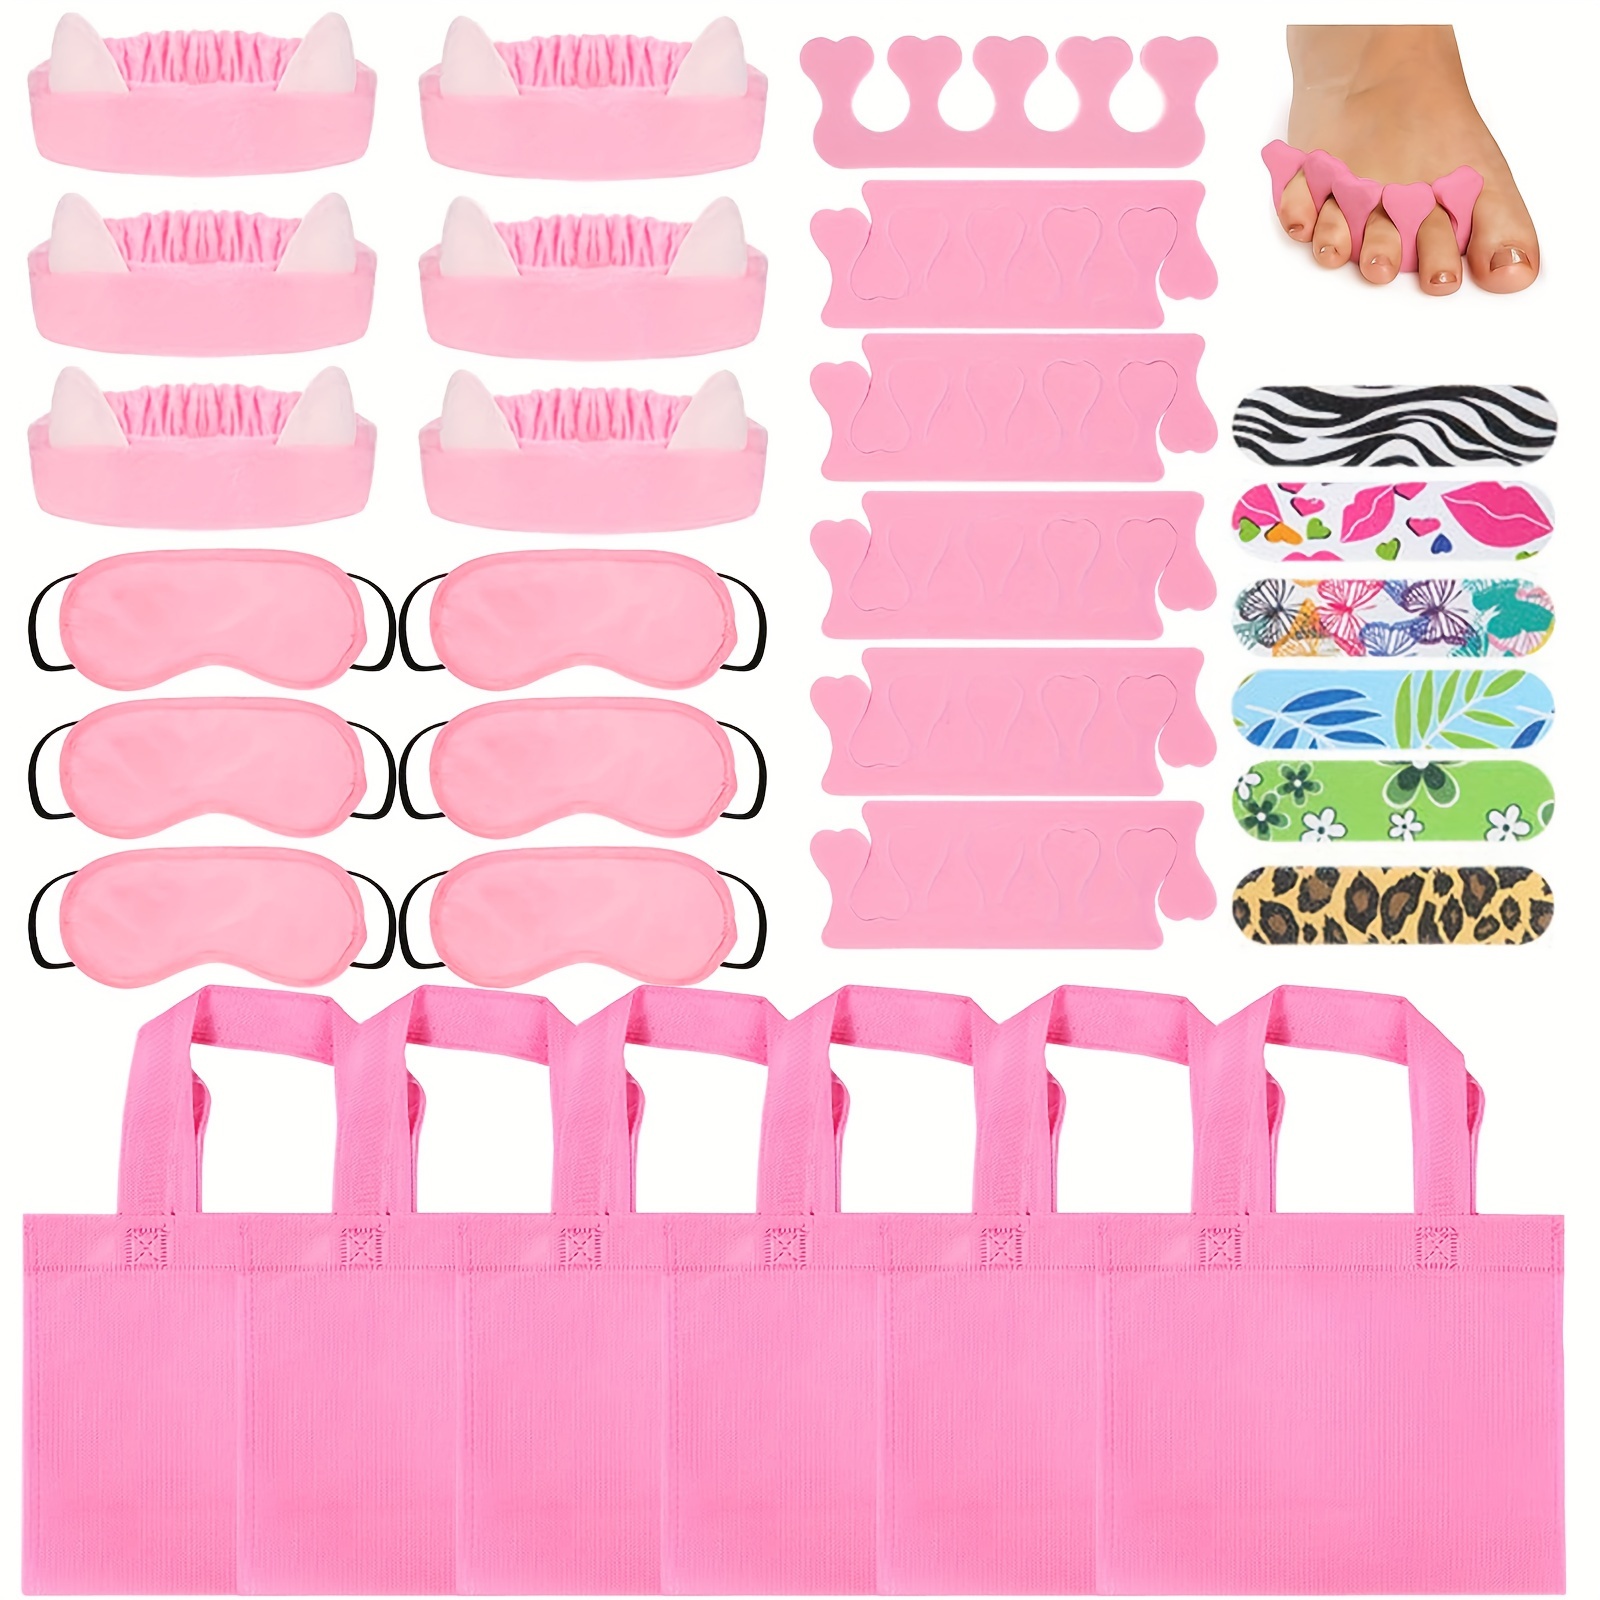 

30pcs Spa Party Favors For Girls Women Spa Party Supplies With 6 Tote Bags 6 Headbands 6 Eye Mask 6 Nail Files 6 Toe Separators Pink Accessories For Birthday Party, Bachelorette Party, Slumber Wedding